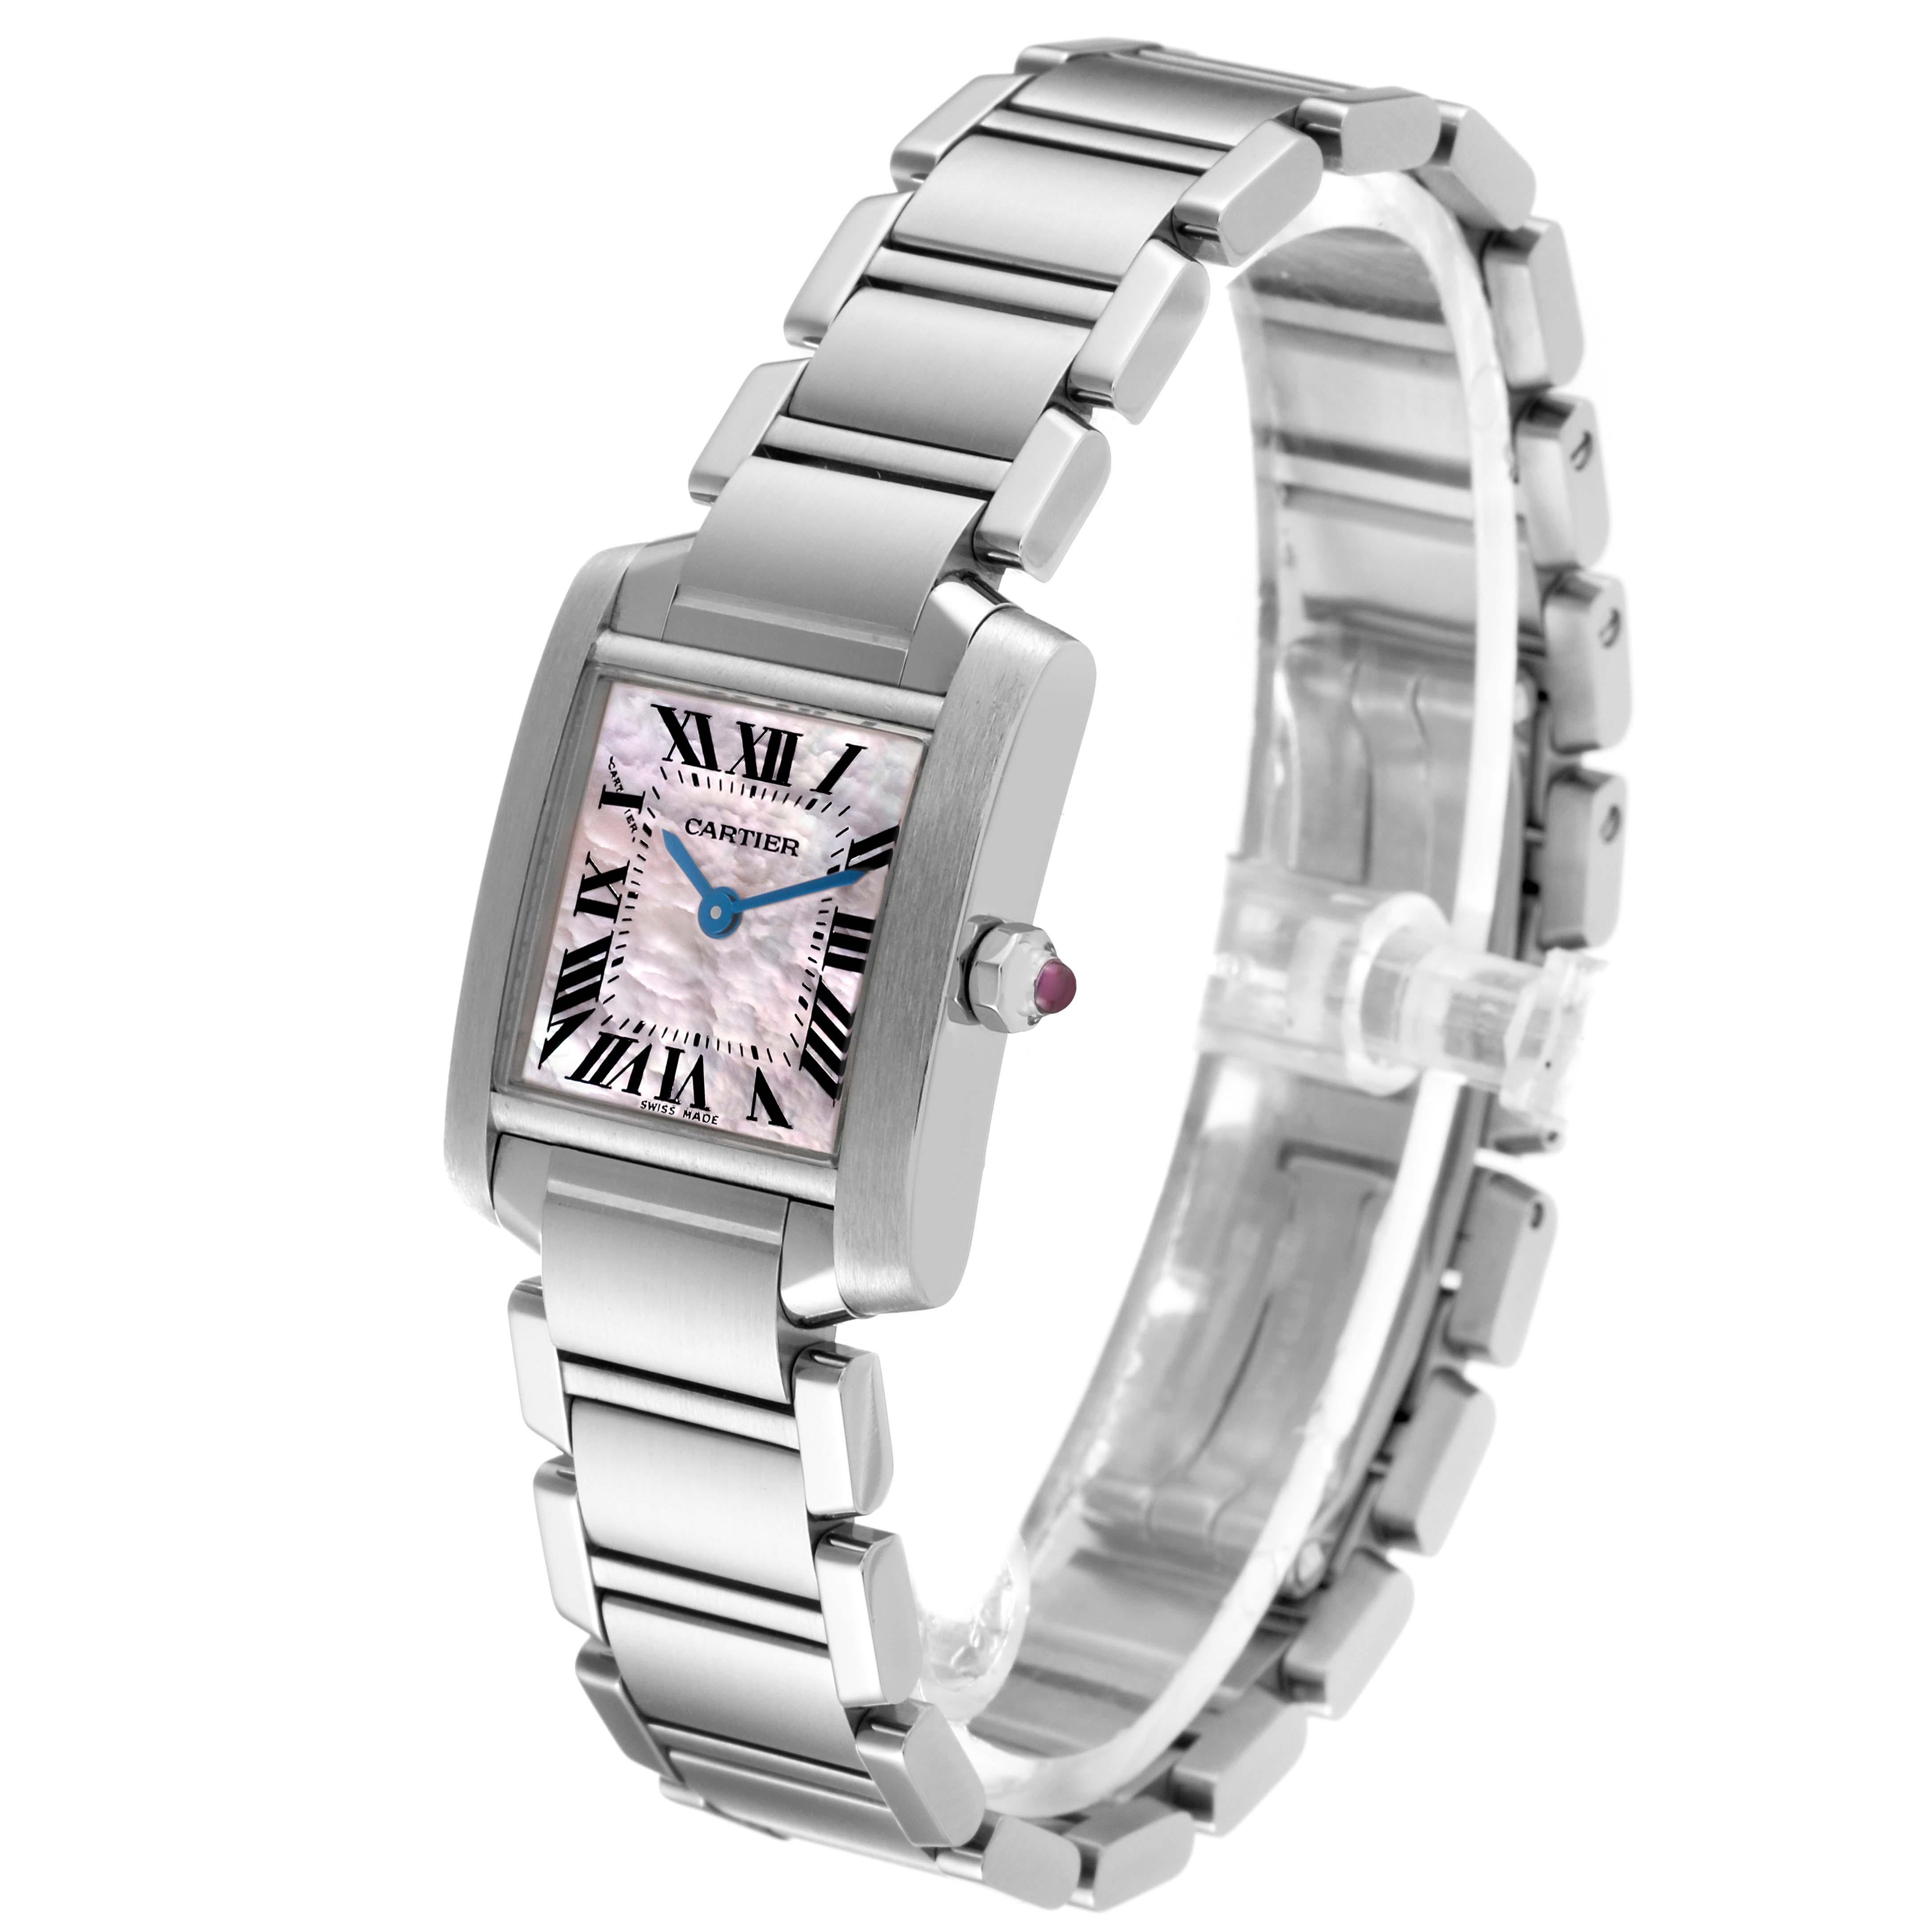 Cartier Tank Francaise Mother Of Pearl Dial Steel Ladies Watch W51028Q3 4